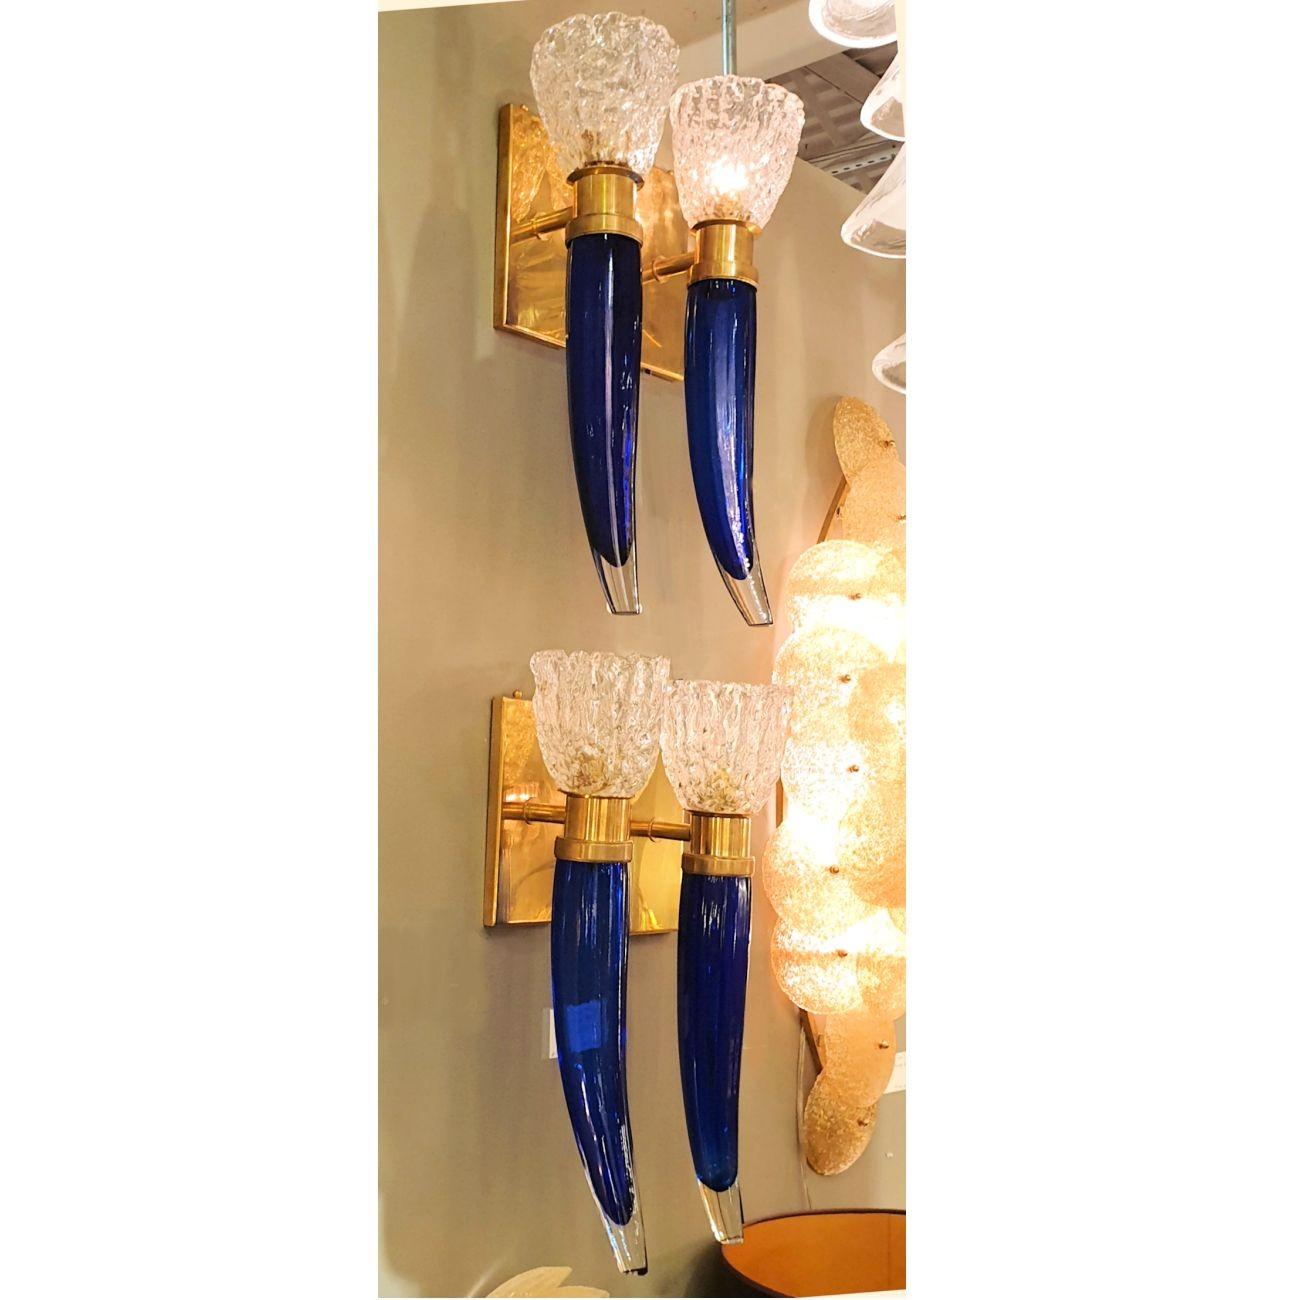 Pair of large Mid-Century Modern Murano glass wall sconces, attributed to Seguso, circa 1970s.
Two pairs of sconces available - set of four sconces : priced and sold by pair.
The vintage sconces are made of brass mounts and handmade Murano glass